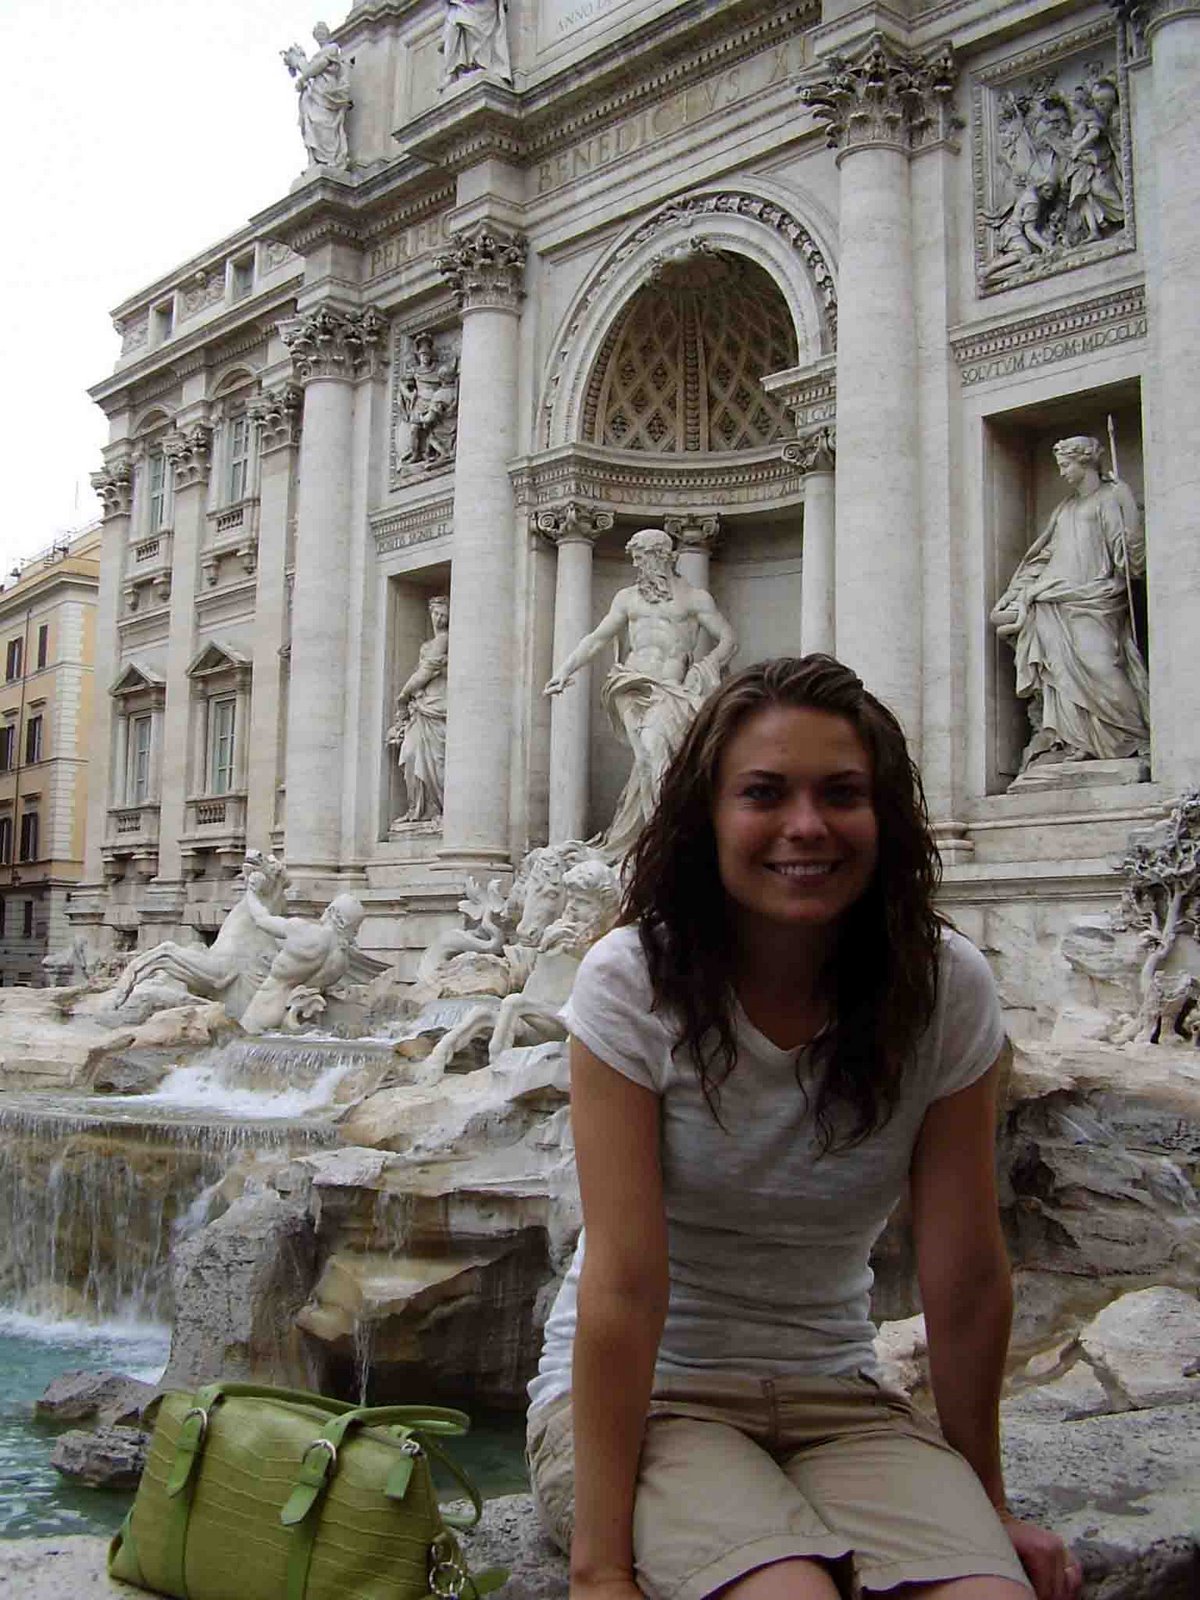 [me+in+front+of+trevi+fountain.jpg]